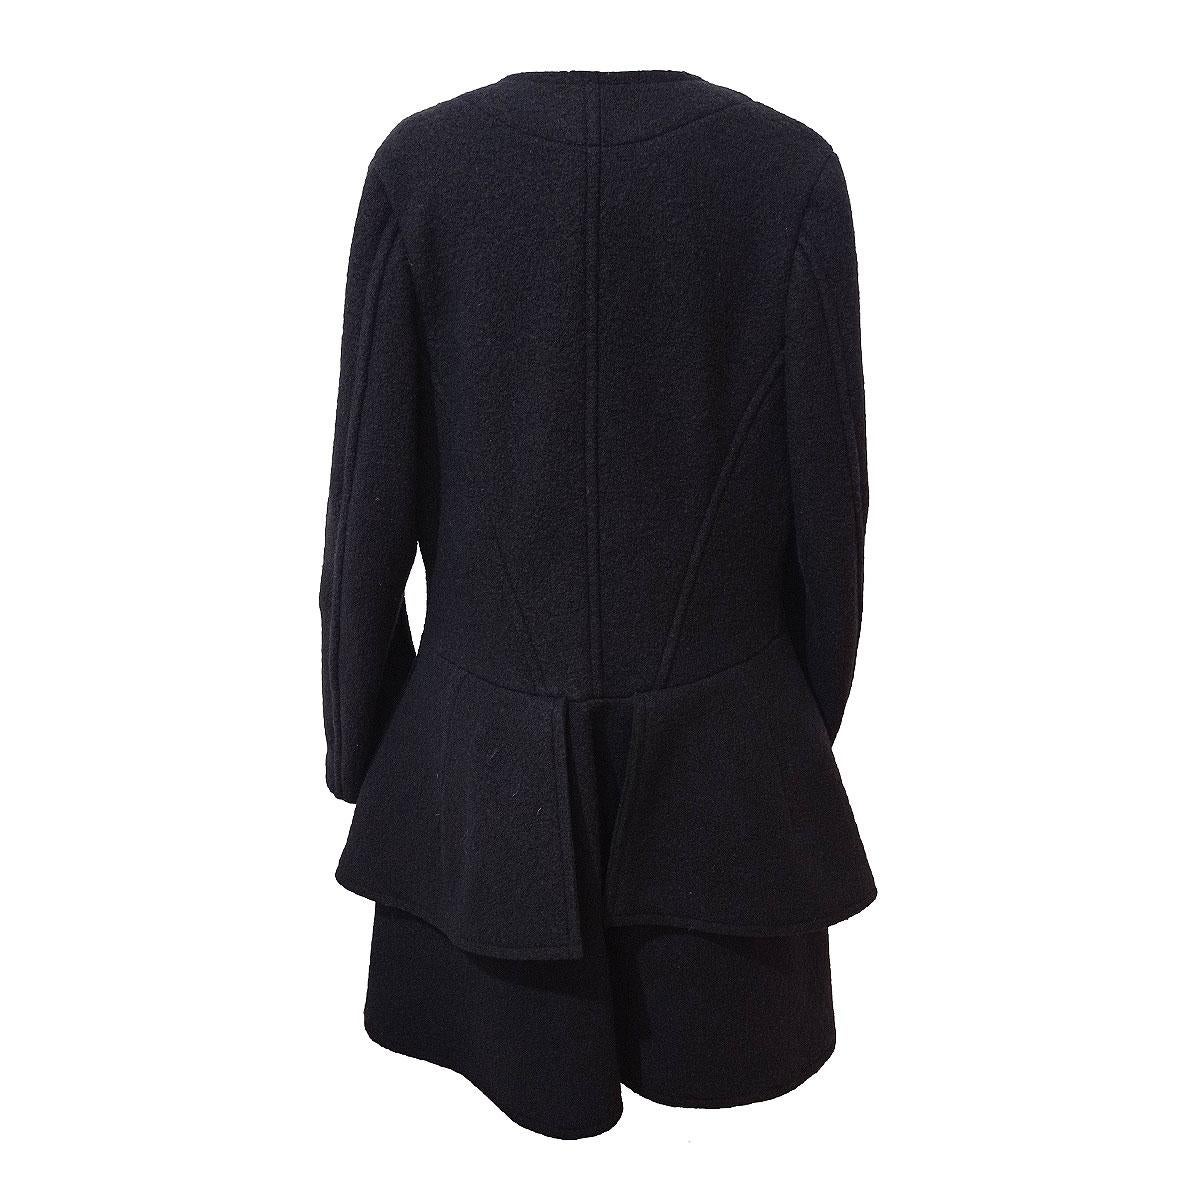 Beautiful Comme des Garçons long jacket
100% Wool 
Black color
Zip closure
Lateral cuts
Shoulder cm 42 (16,5 inches)
Shoulder / hem cm 90 (20,4 inches)
Worldwide express shipping included in the price !